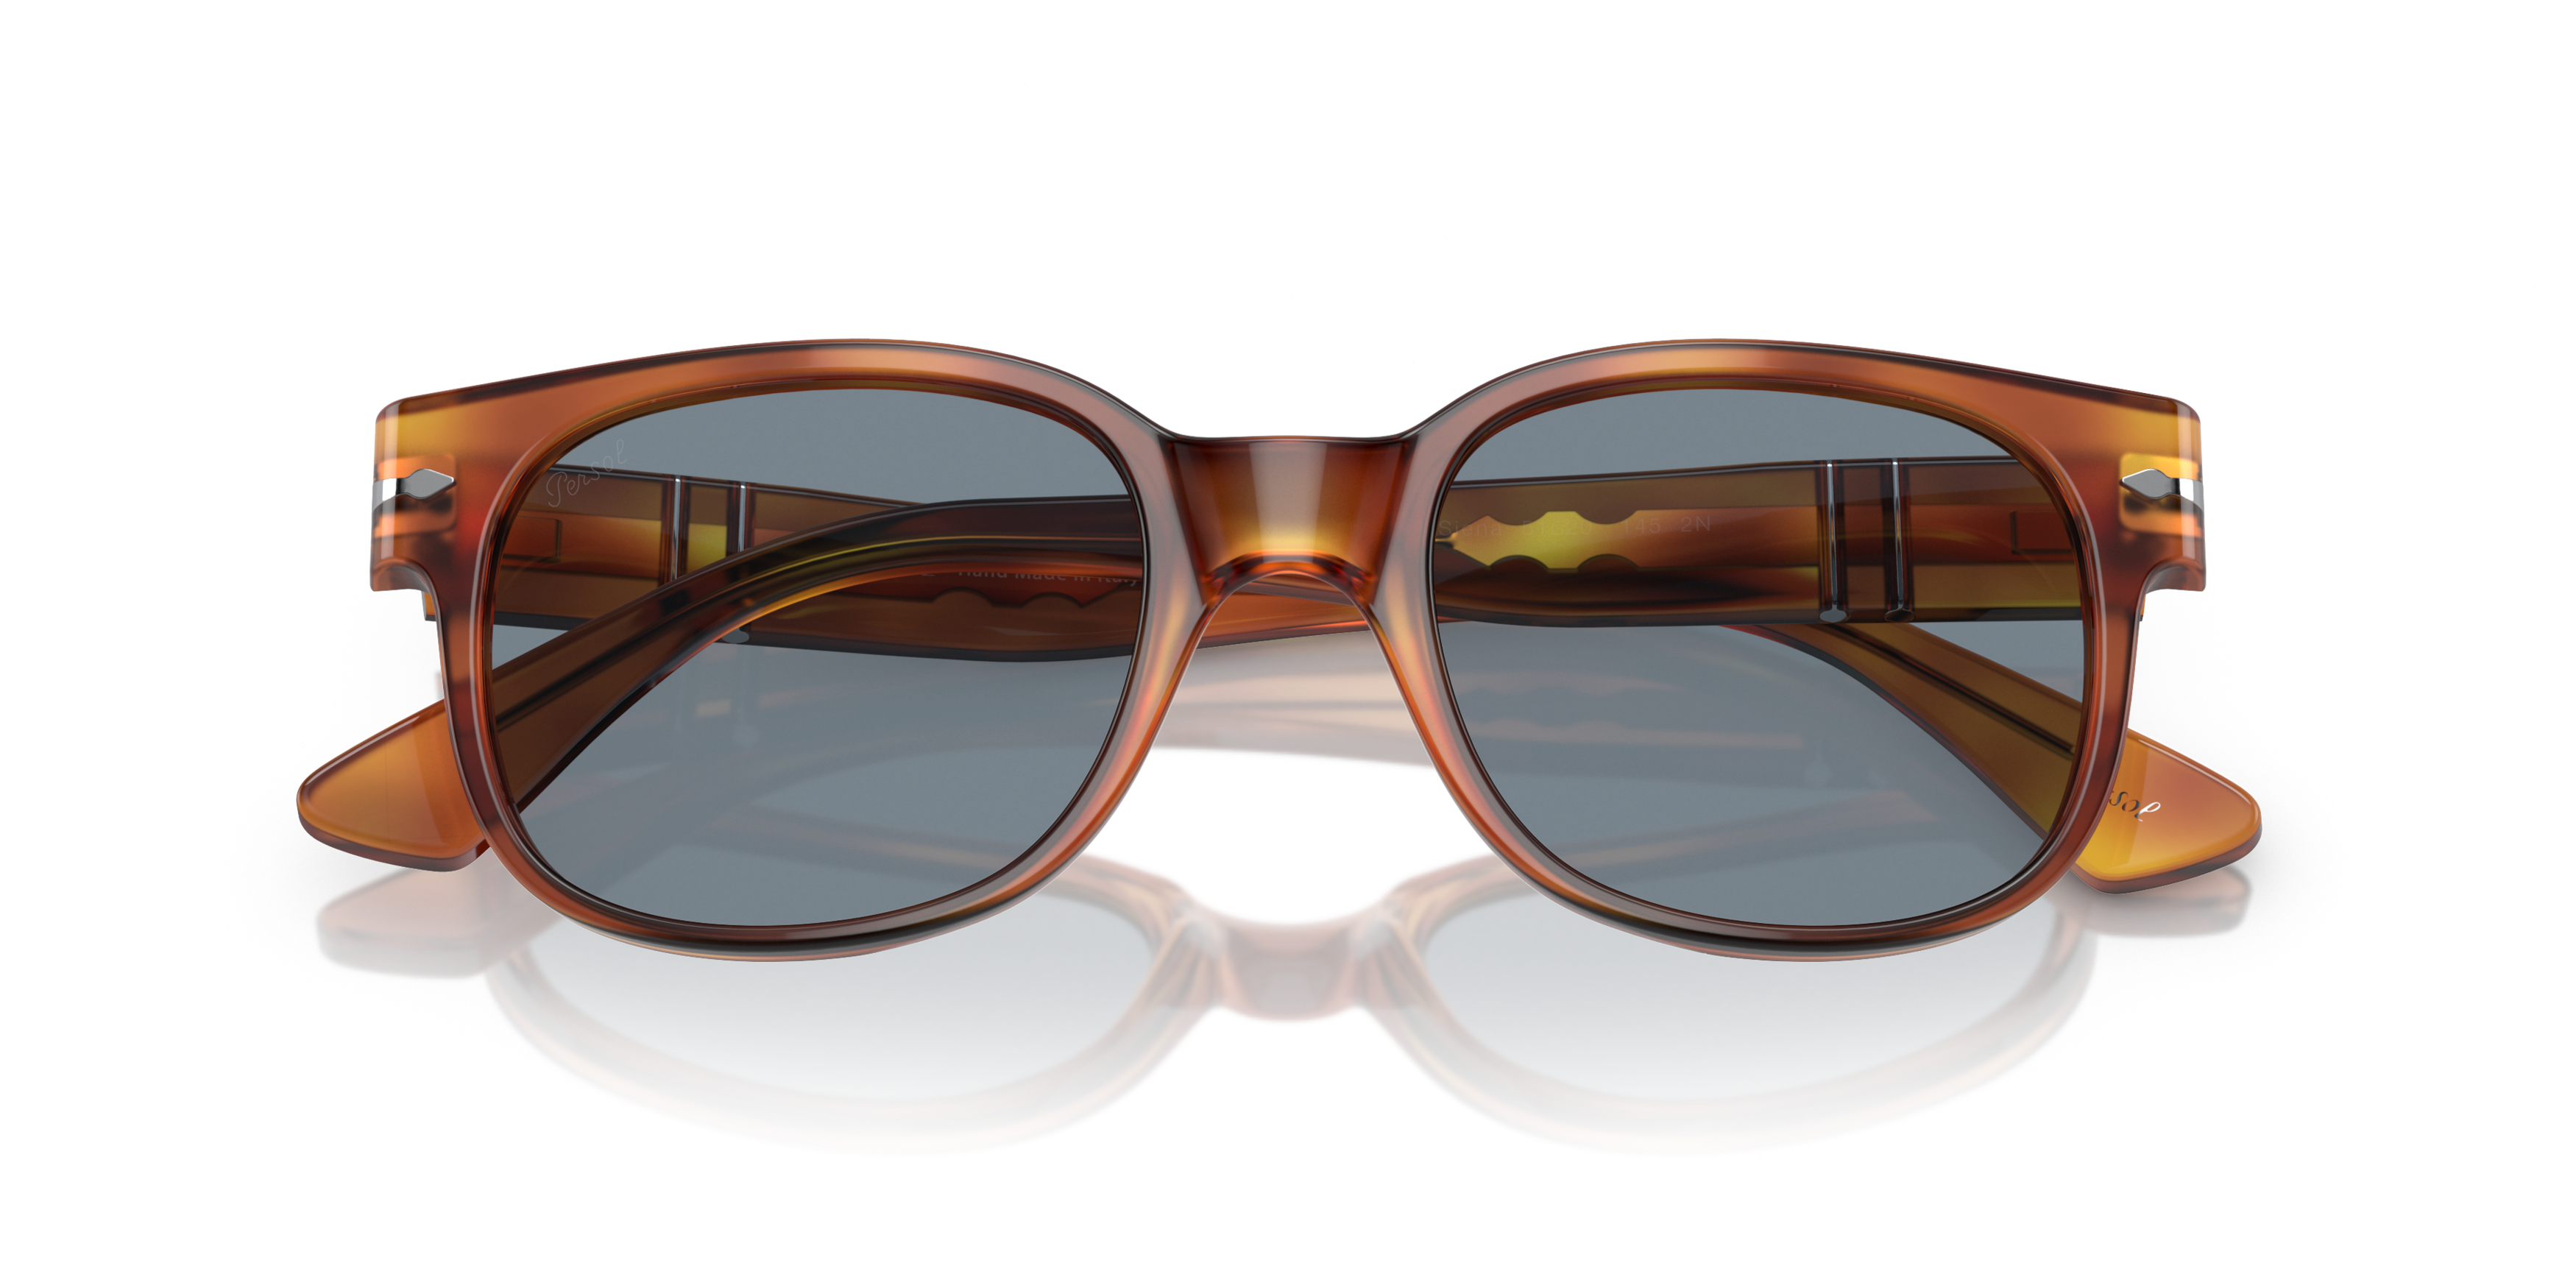 [products.image.folded] Persol 0PO3257S 96/56